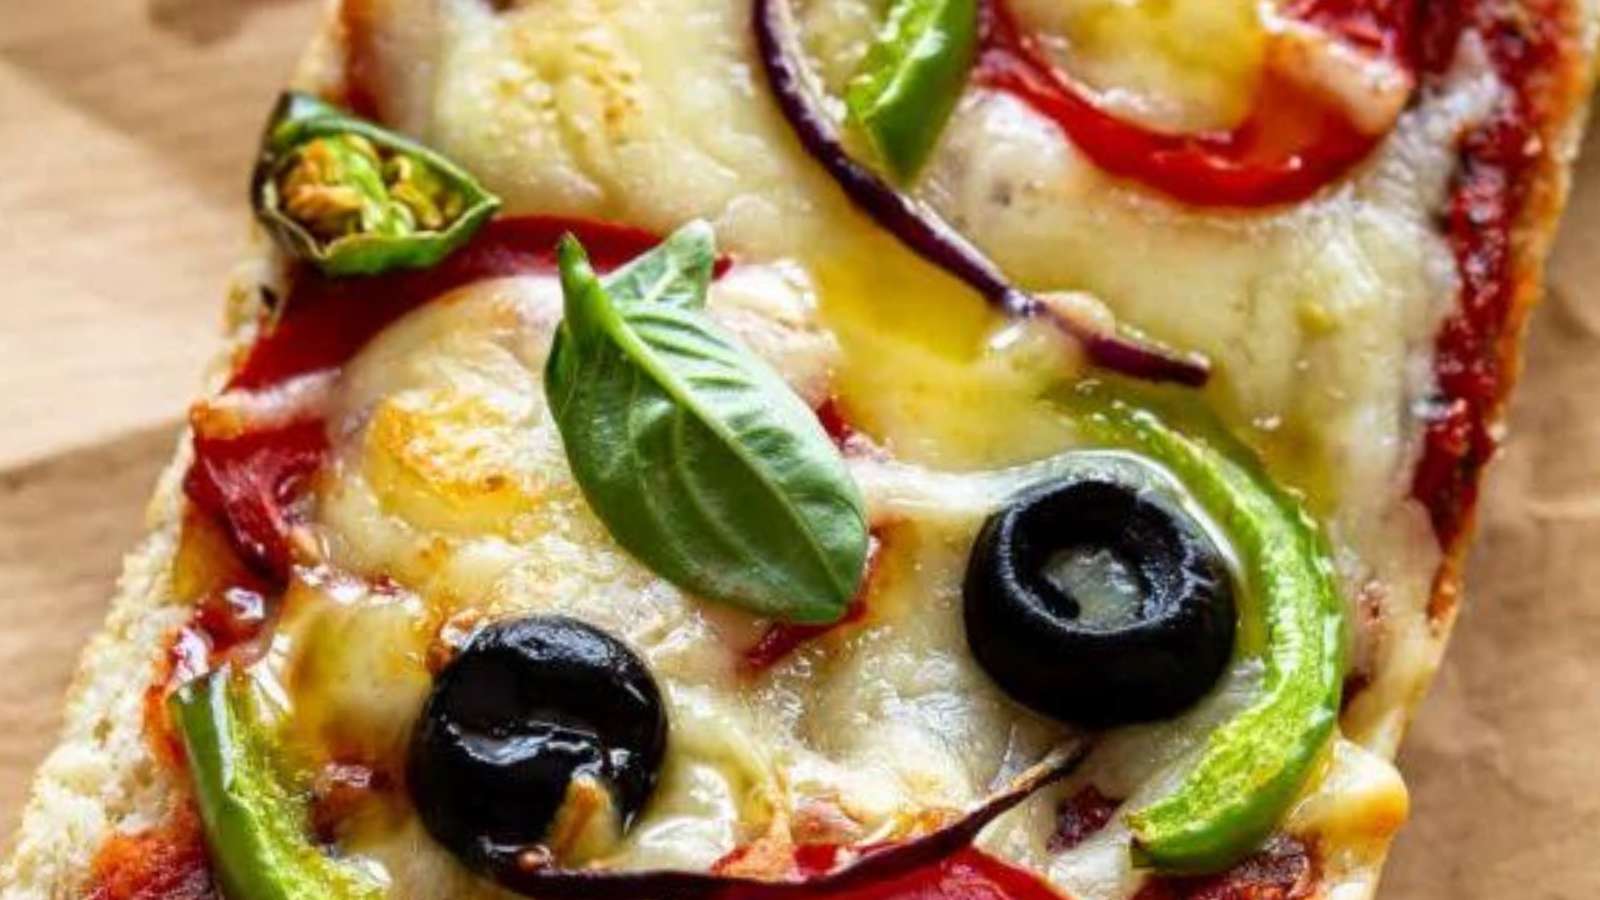 A slice of pizza with olives, tomatoes and basil.